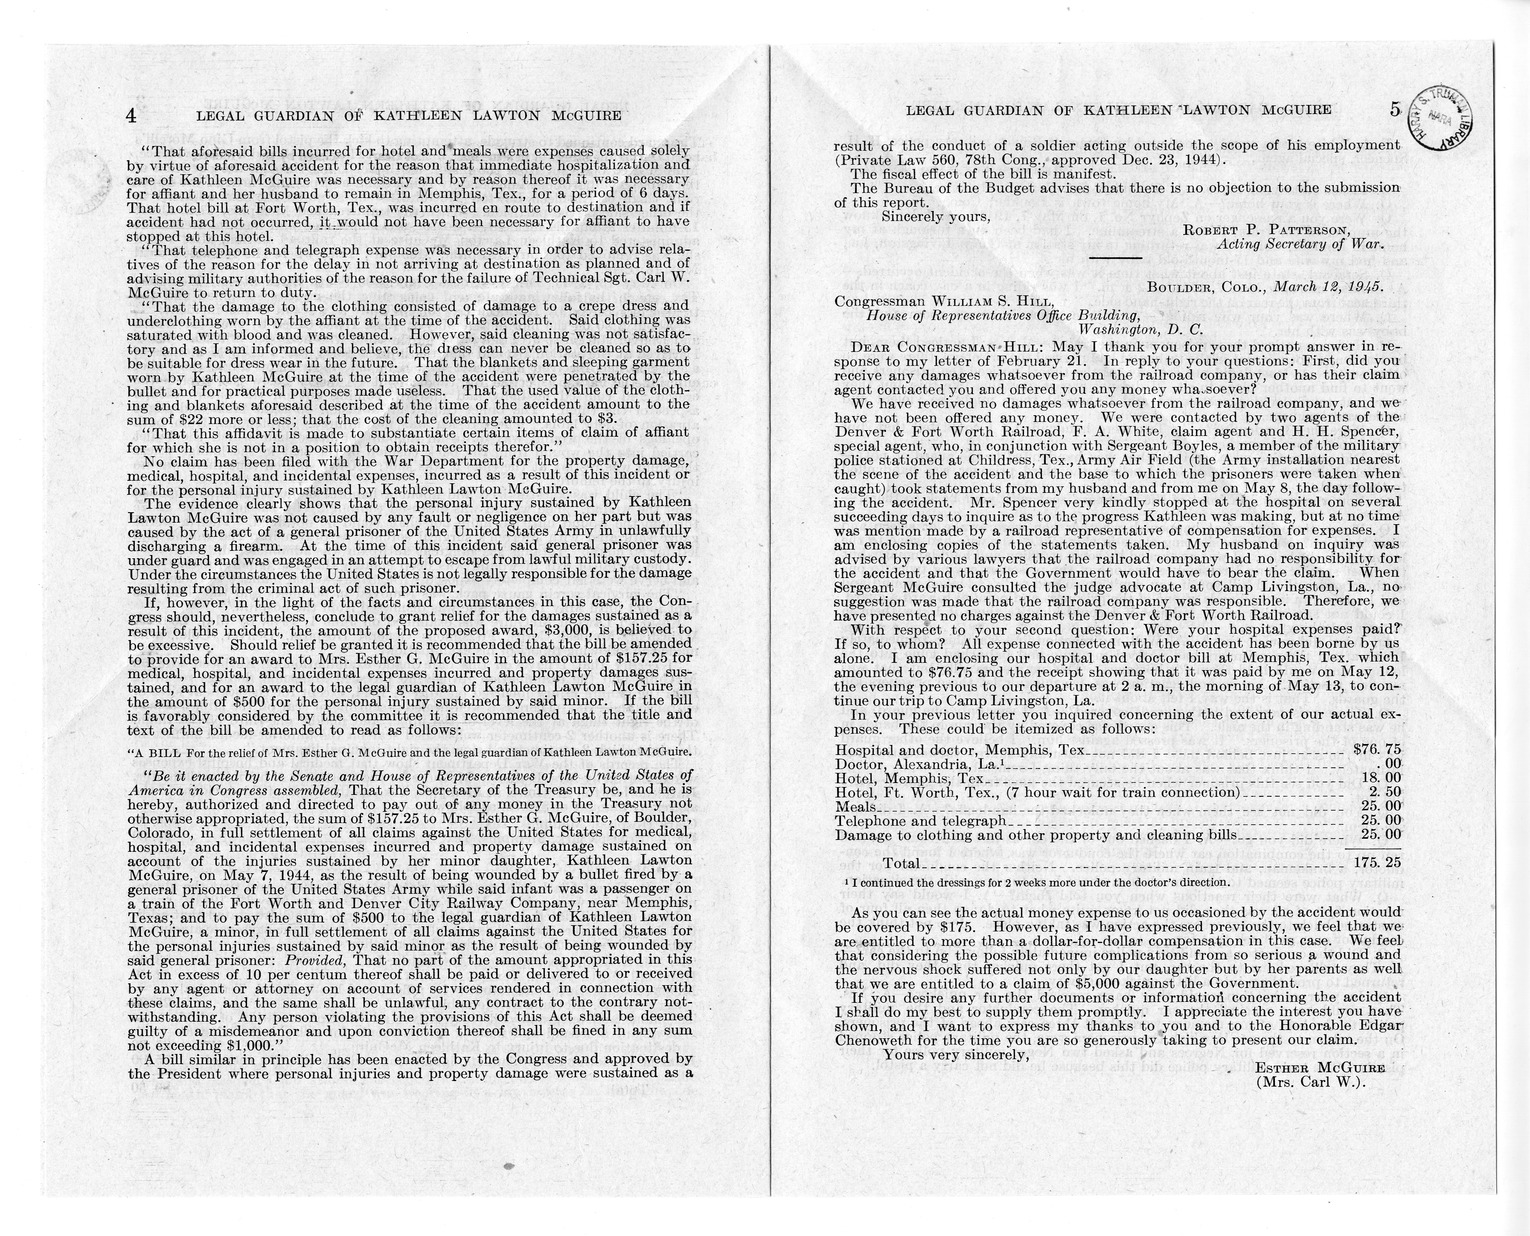 Memorandum from Frederick J. Bailey to M. C. Latta, H. R. 2670, For the Relief of the Legal Guardian of Kathleen Lawton McGuire, with Attachments